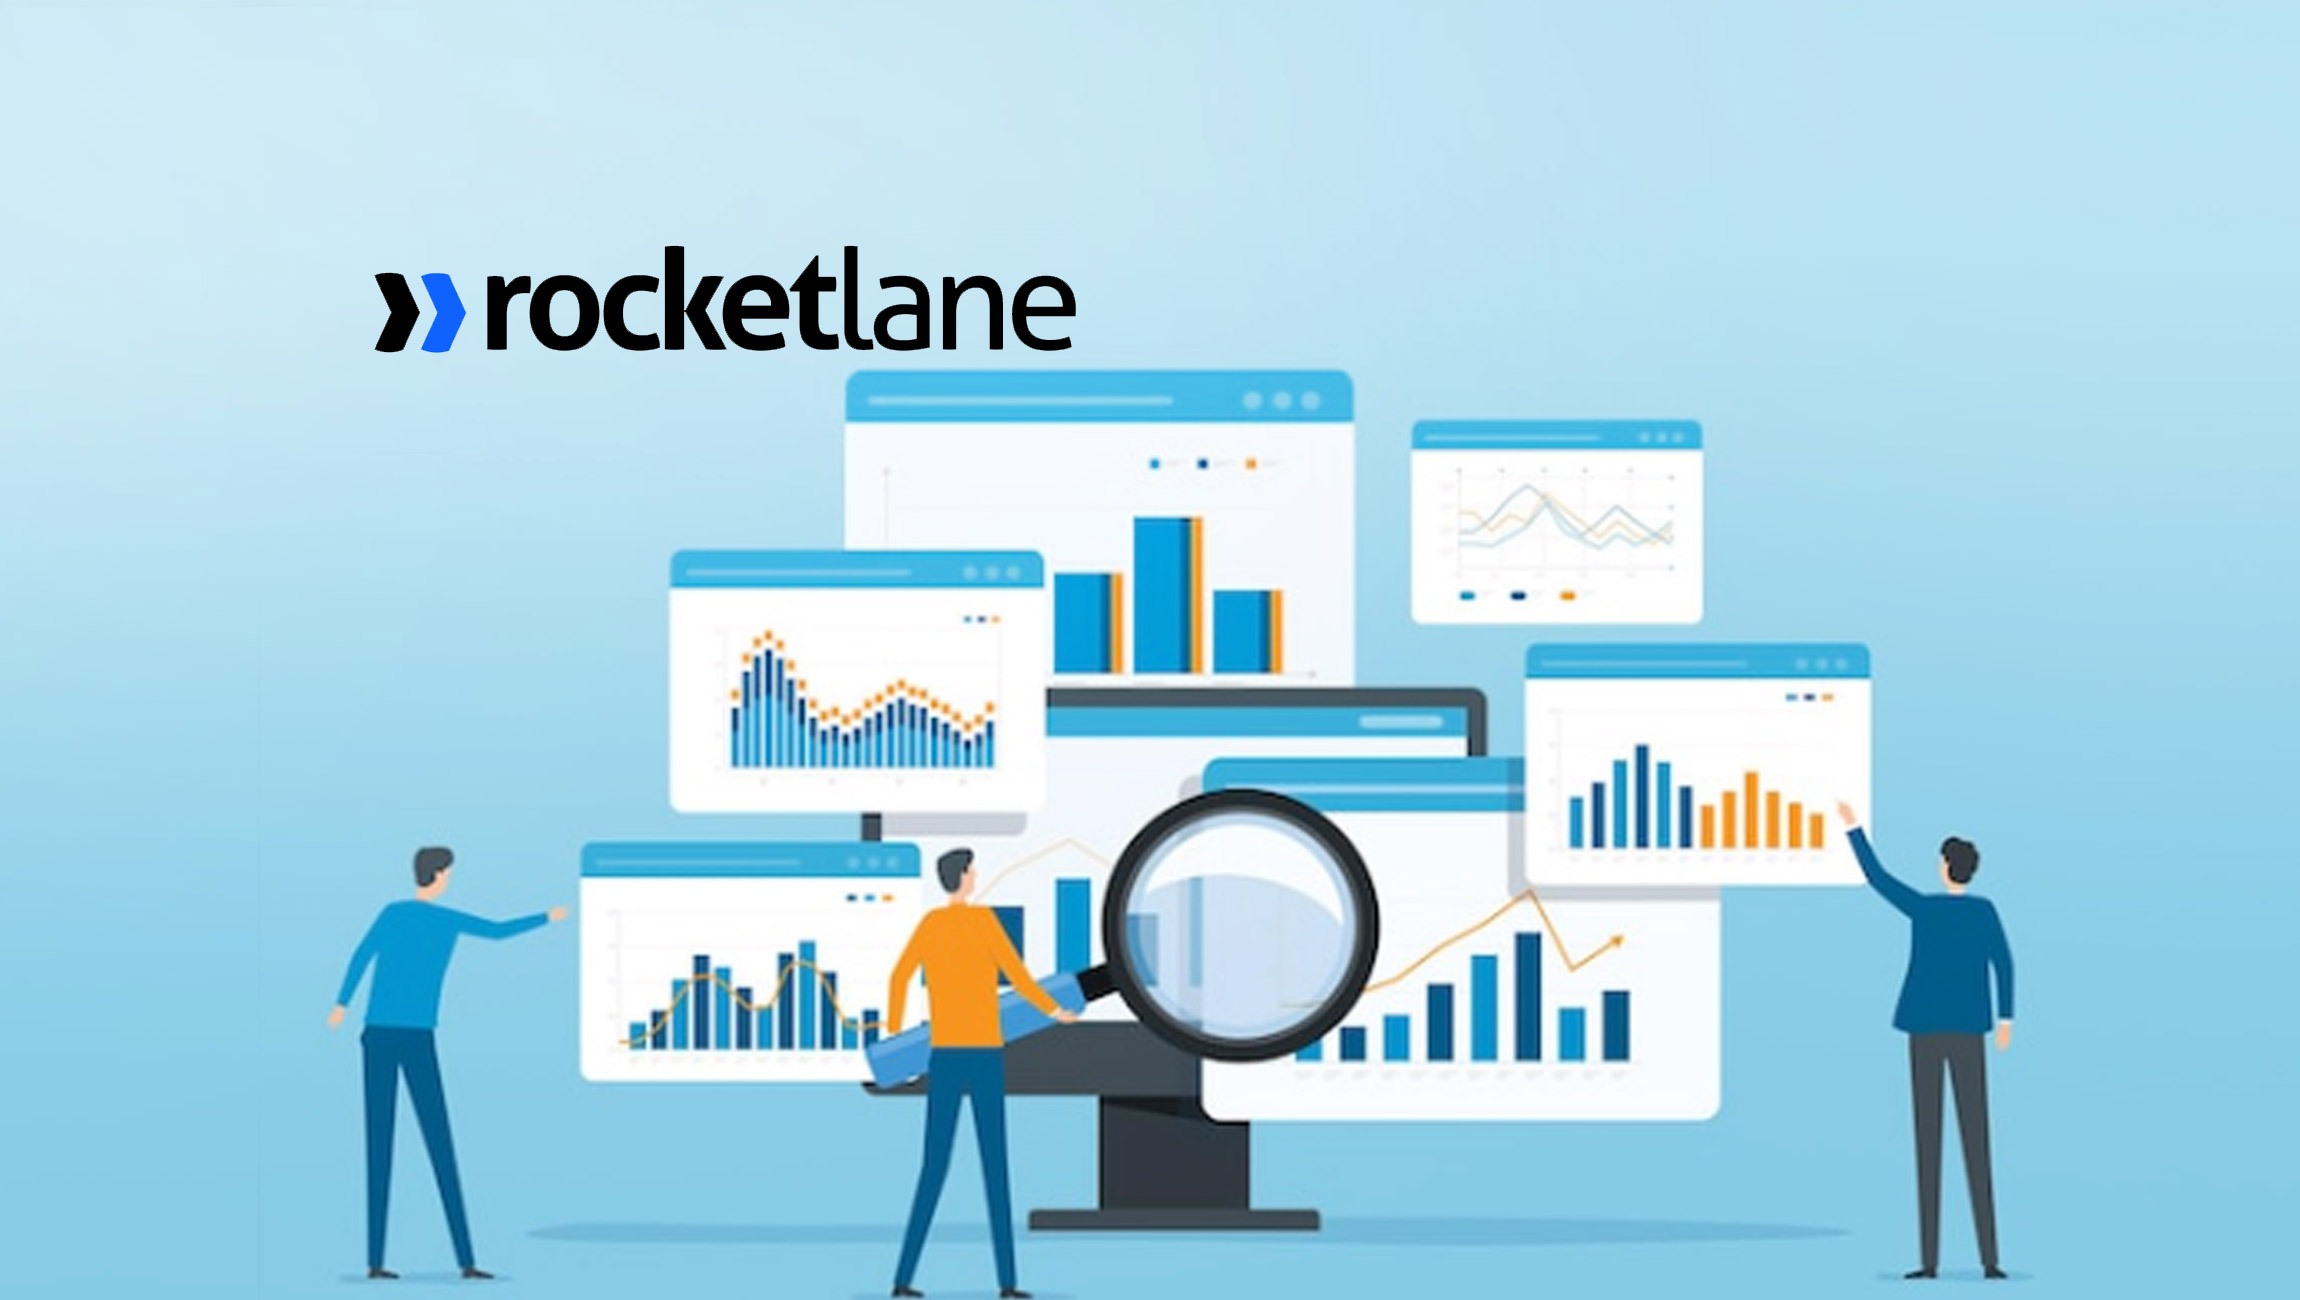 Rocketlane Automates Resource Management With its New Auto-Allocate Functionality